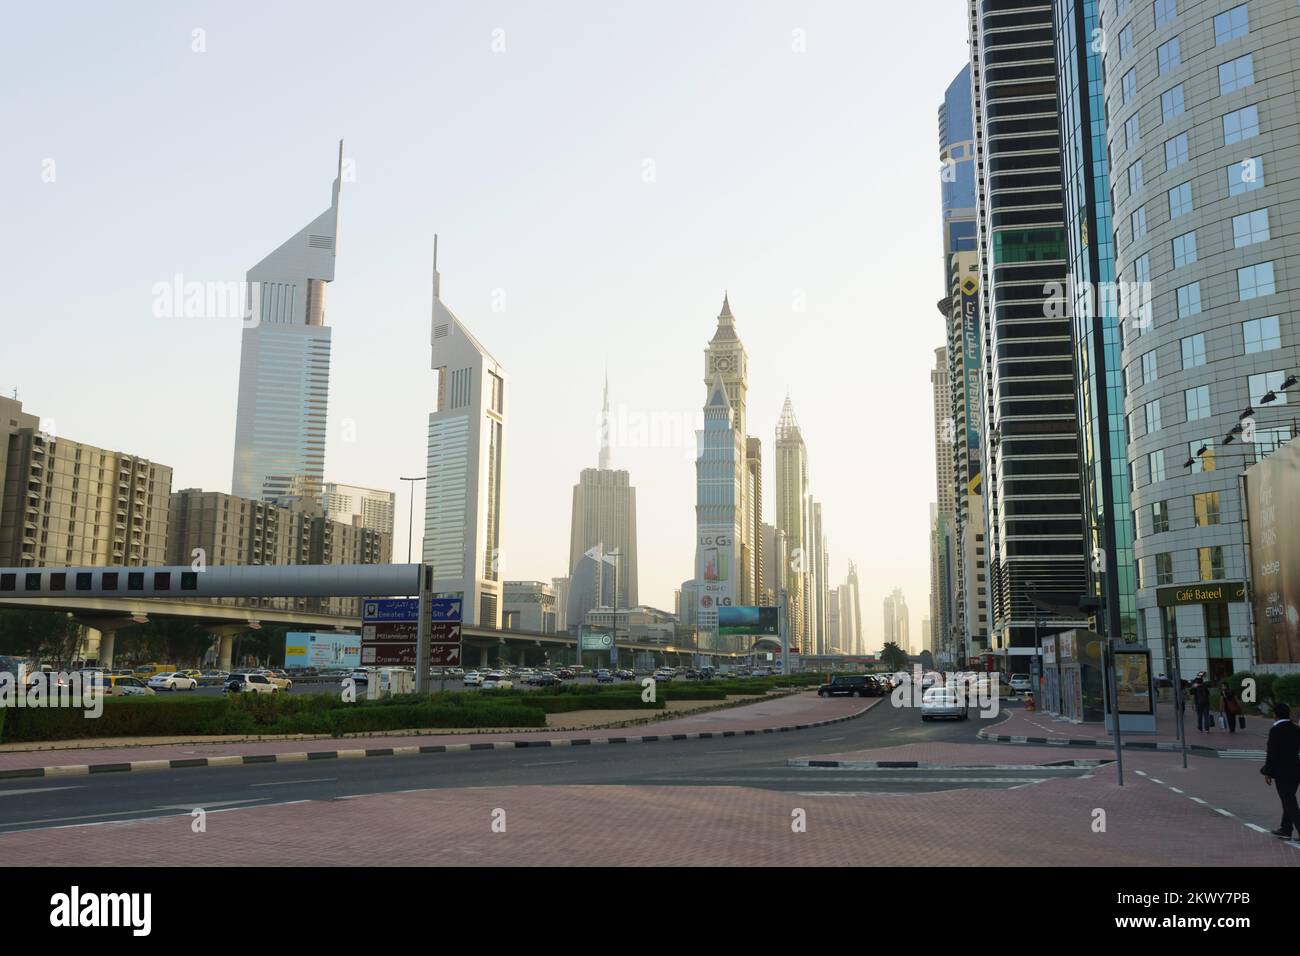 DUBAI - OCT 16: Dubai downtown on October 16, 2014. Dubai is the most populous city and emirate in the UAE, and the second largest emirate by territor Stock Photo